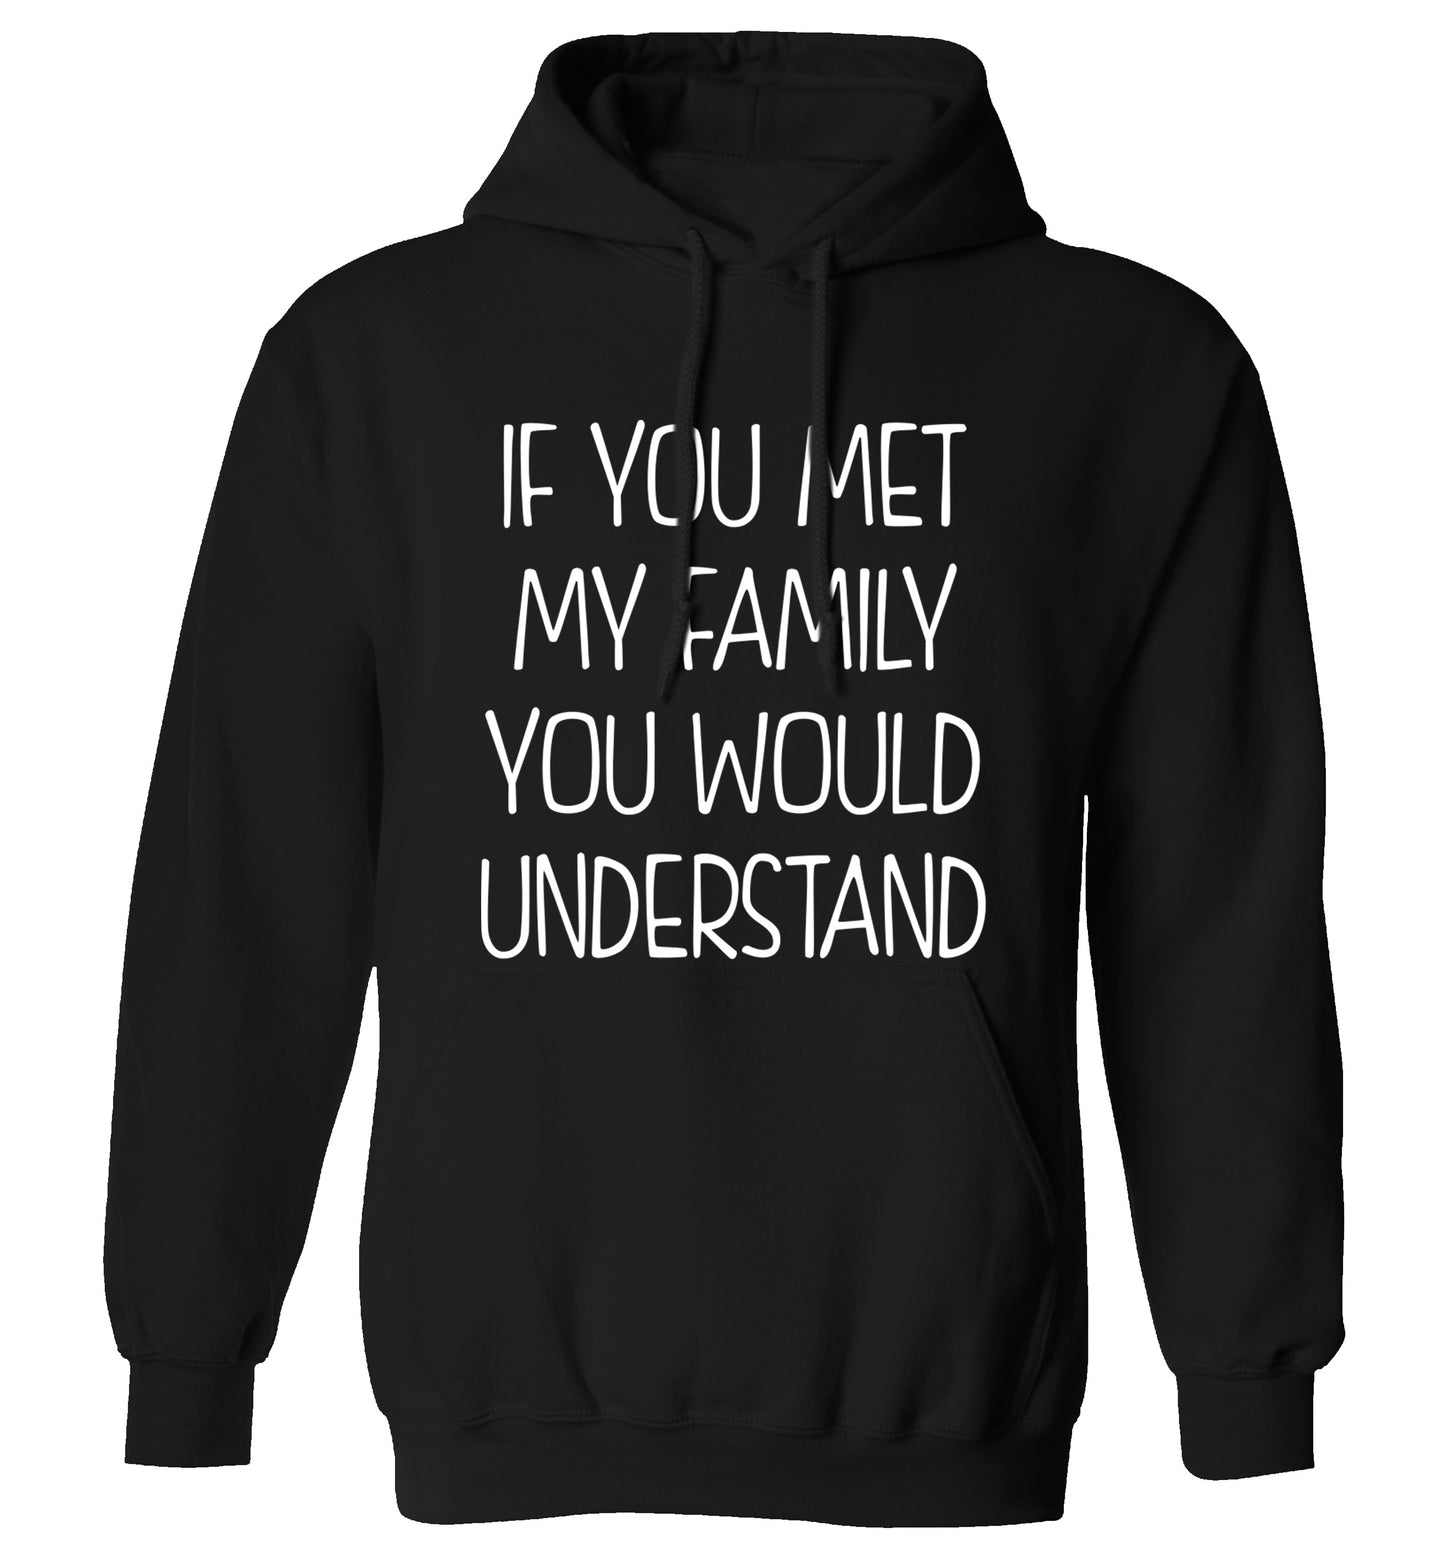 If you met my family you would understand adults unisex black hoodie 2XL